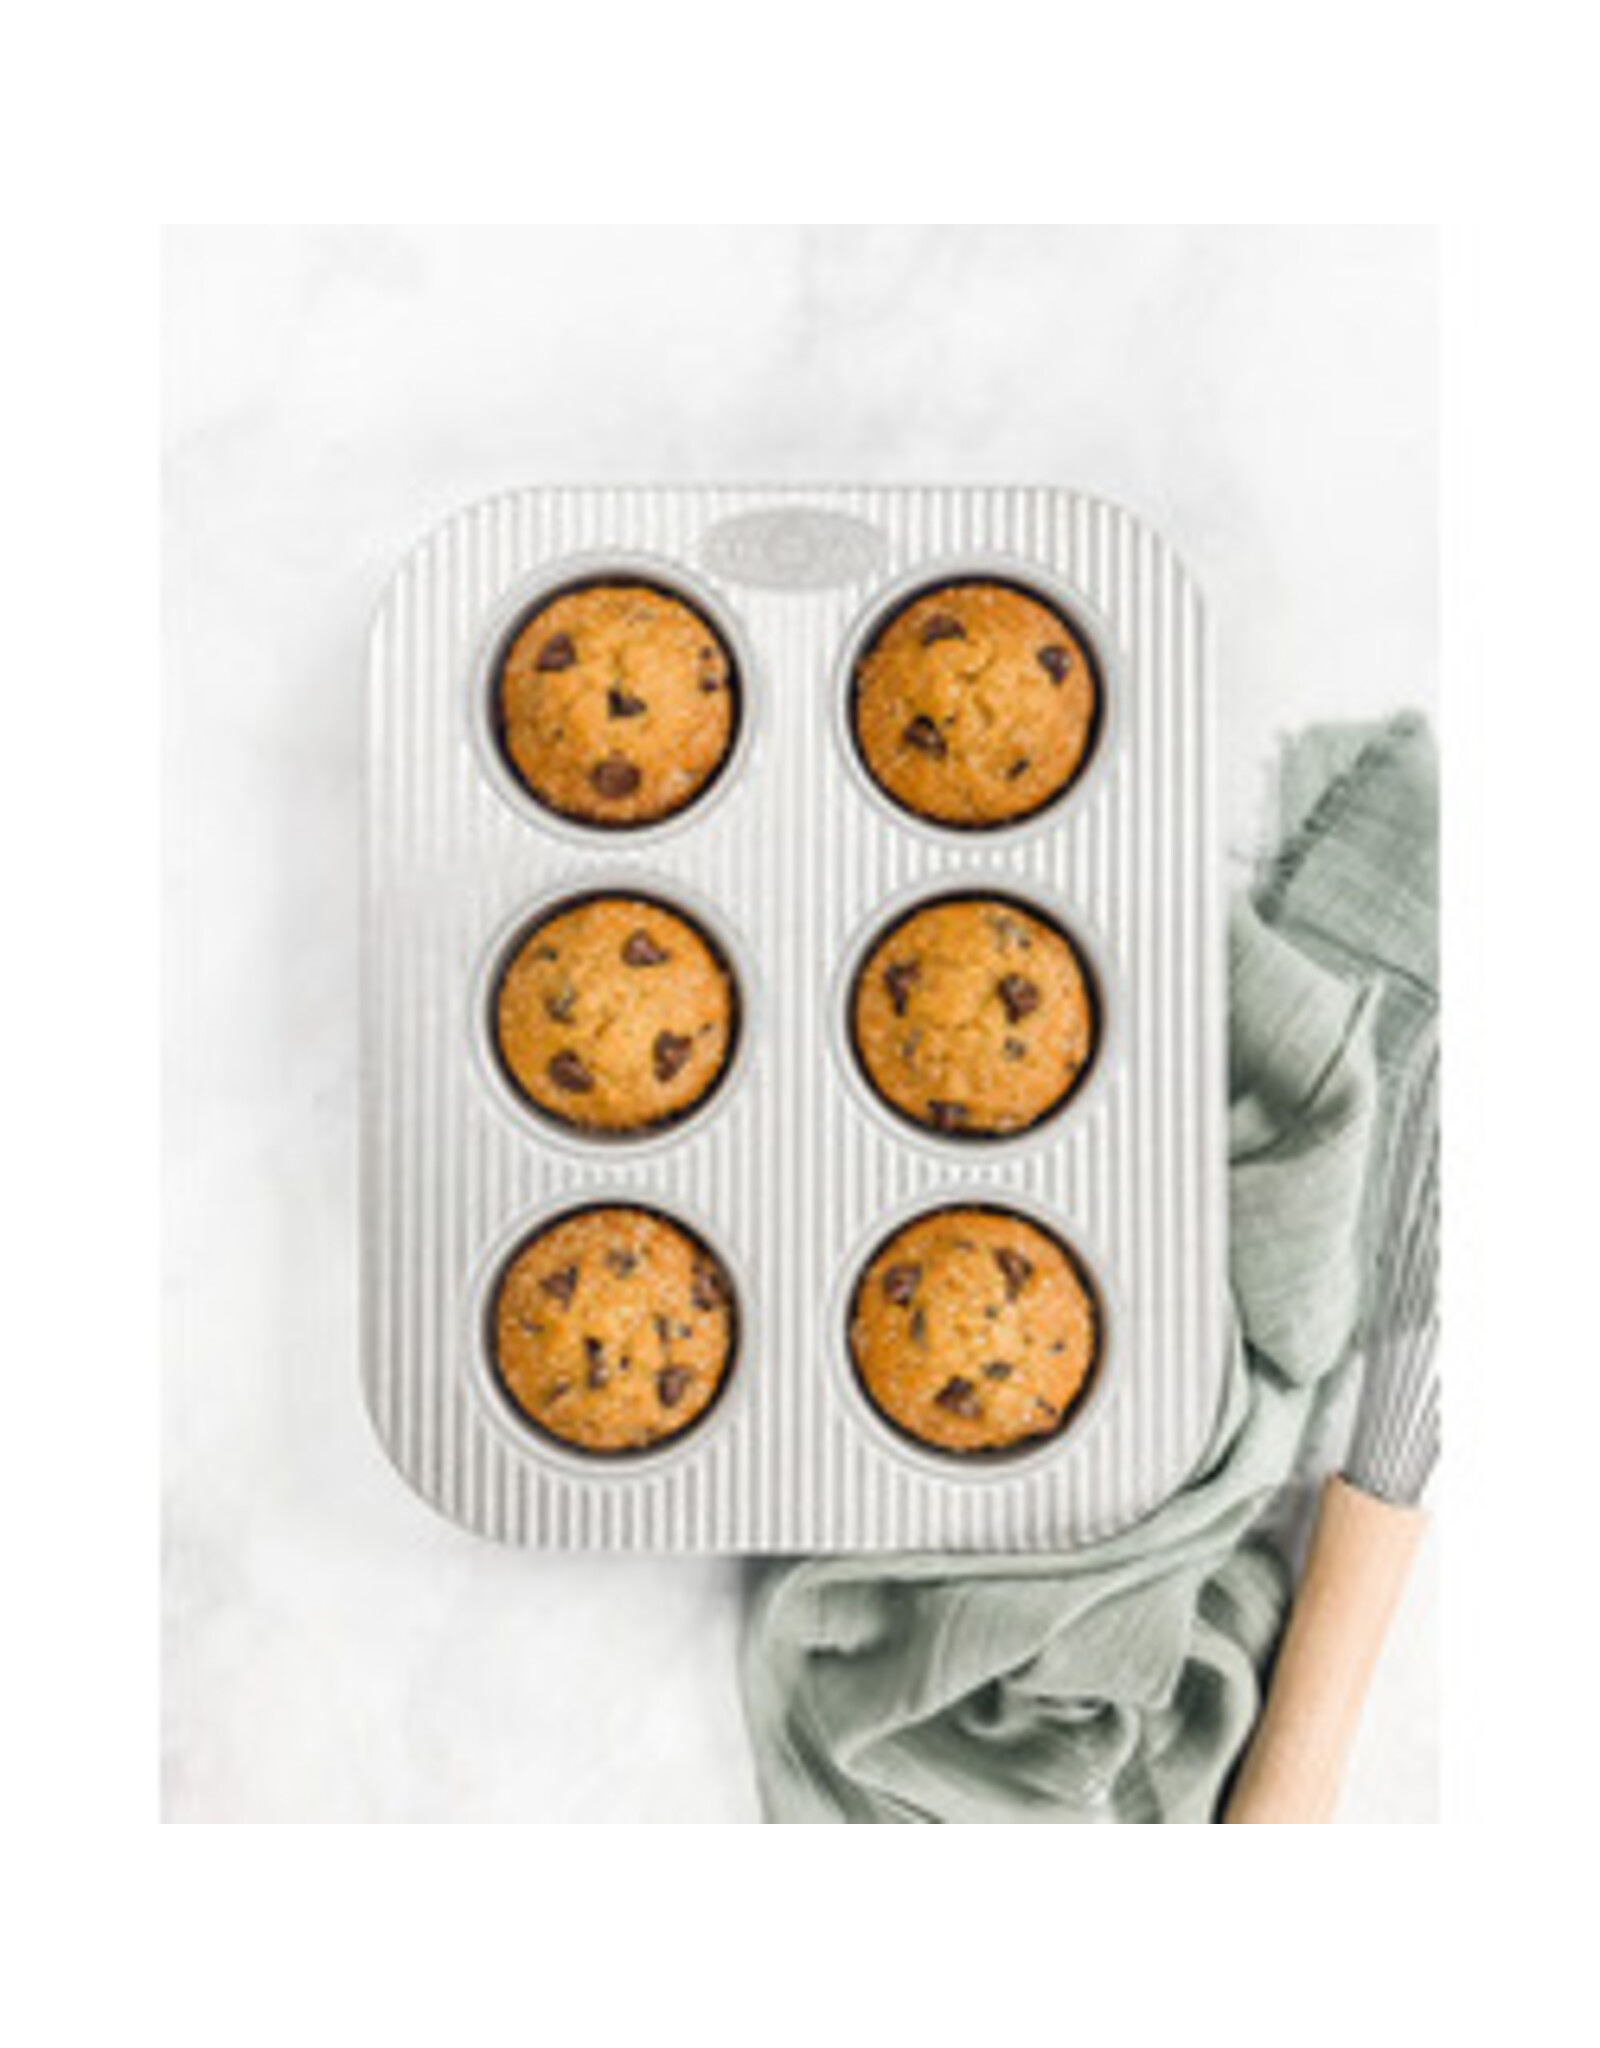 Strapped Mini Loaf Pan by USA Pan